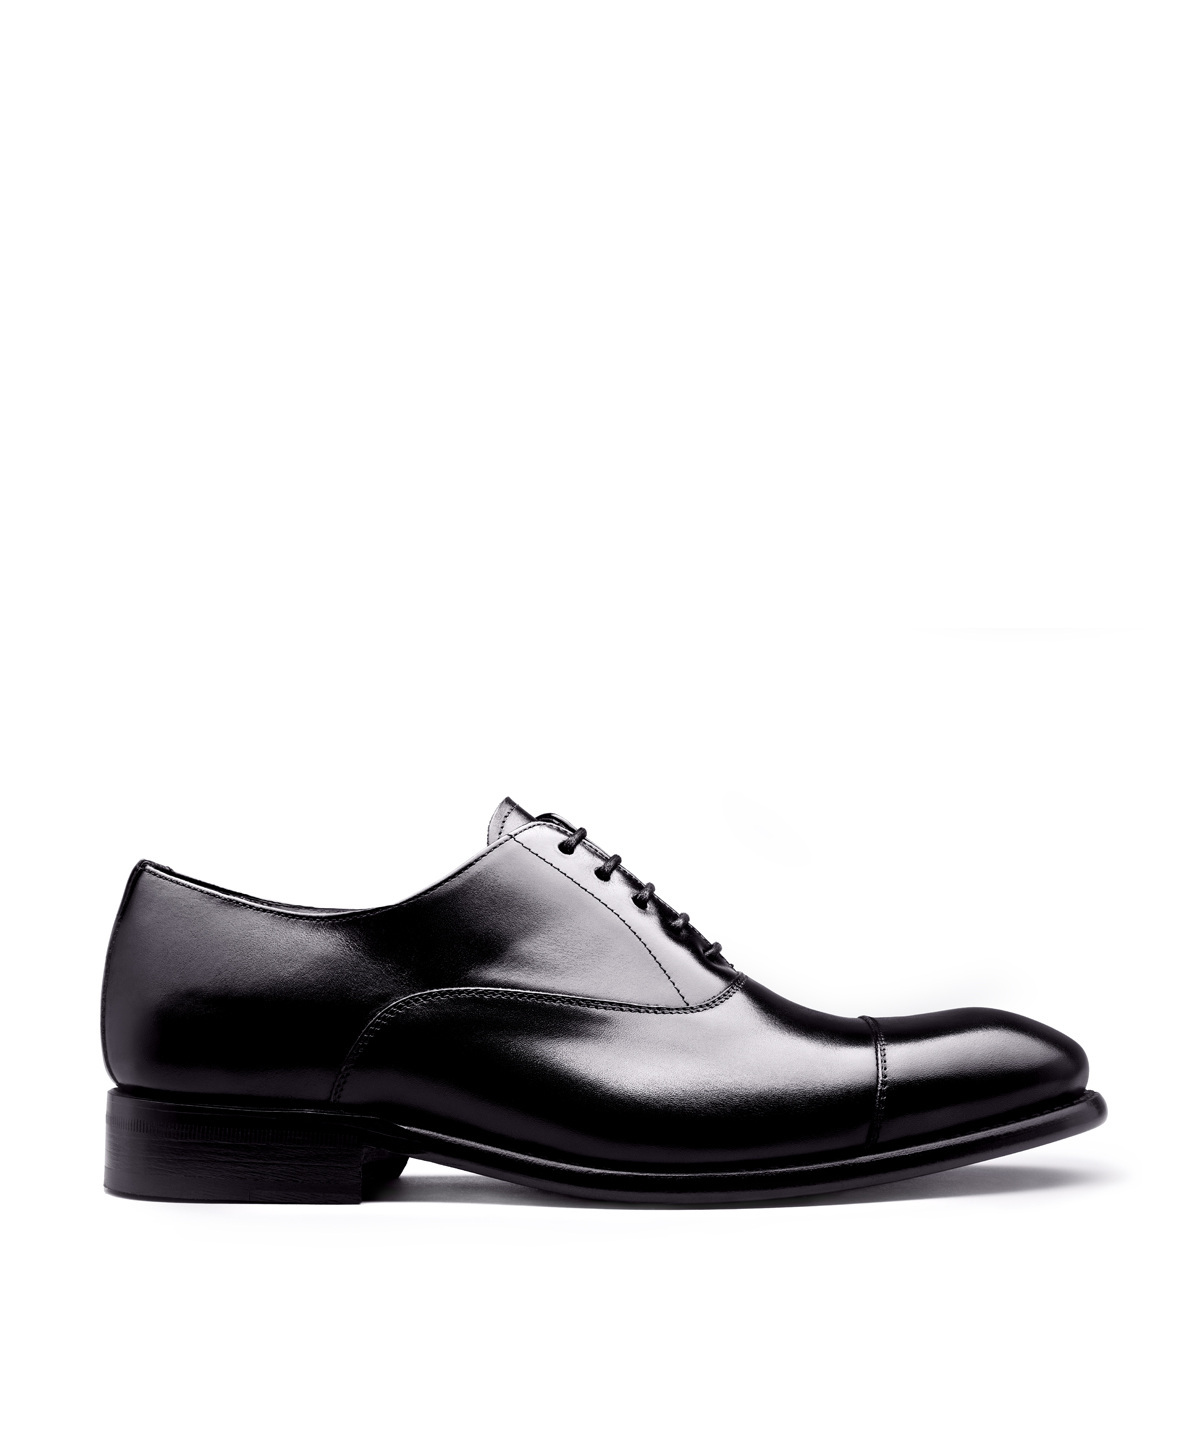 cherry boutique Chaussure Oxford noir style d\u00e9contract\u00e9 Chaussures Chaussures de travail Chaussures Oxford 